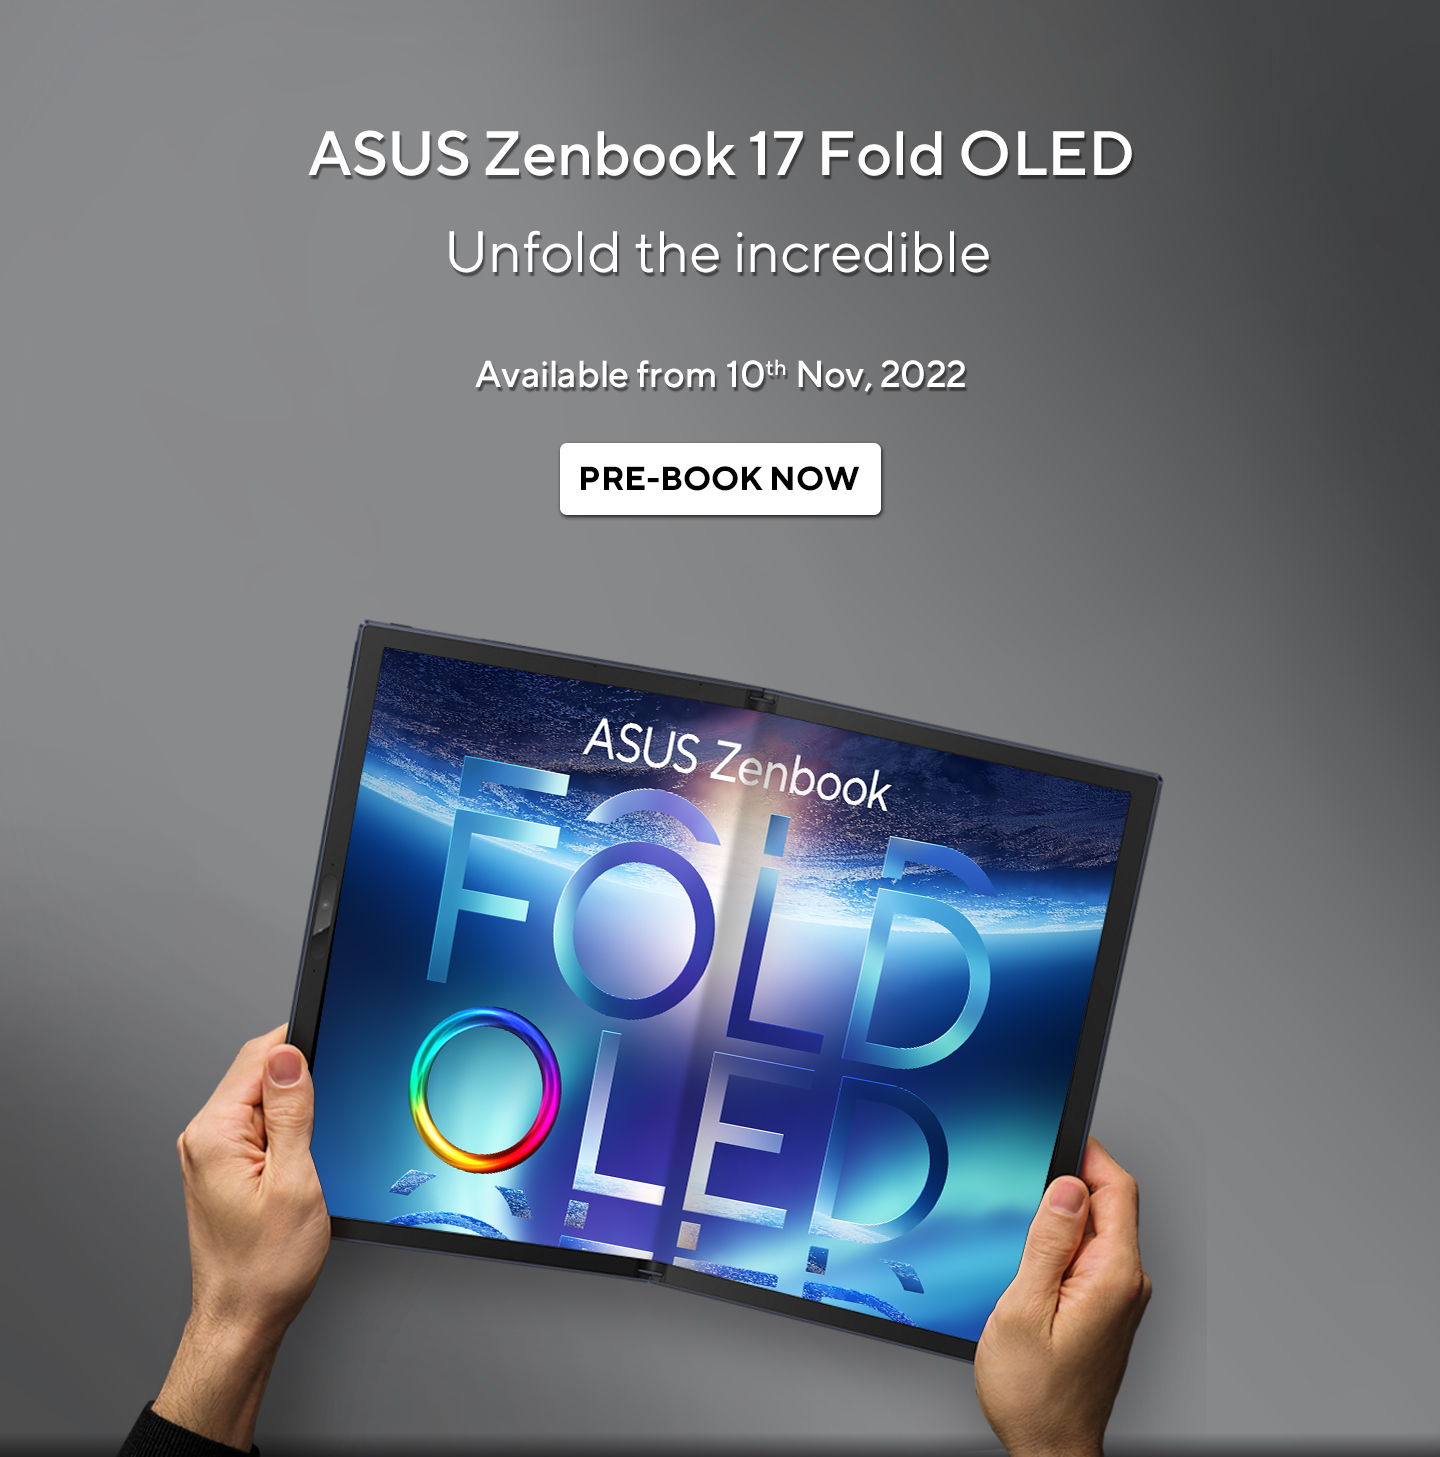 Zenbook 17 Fold OLED UX9702｜Laptops For Home｜ASUS India